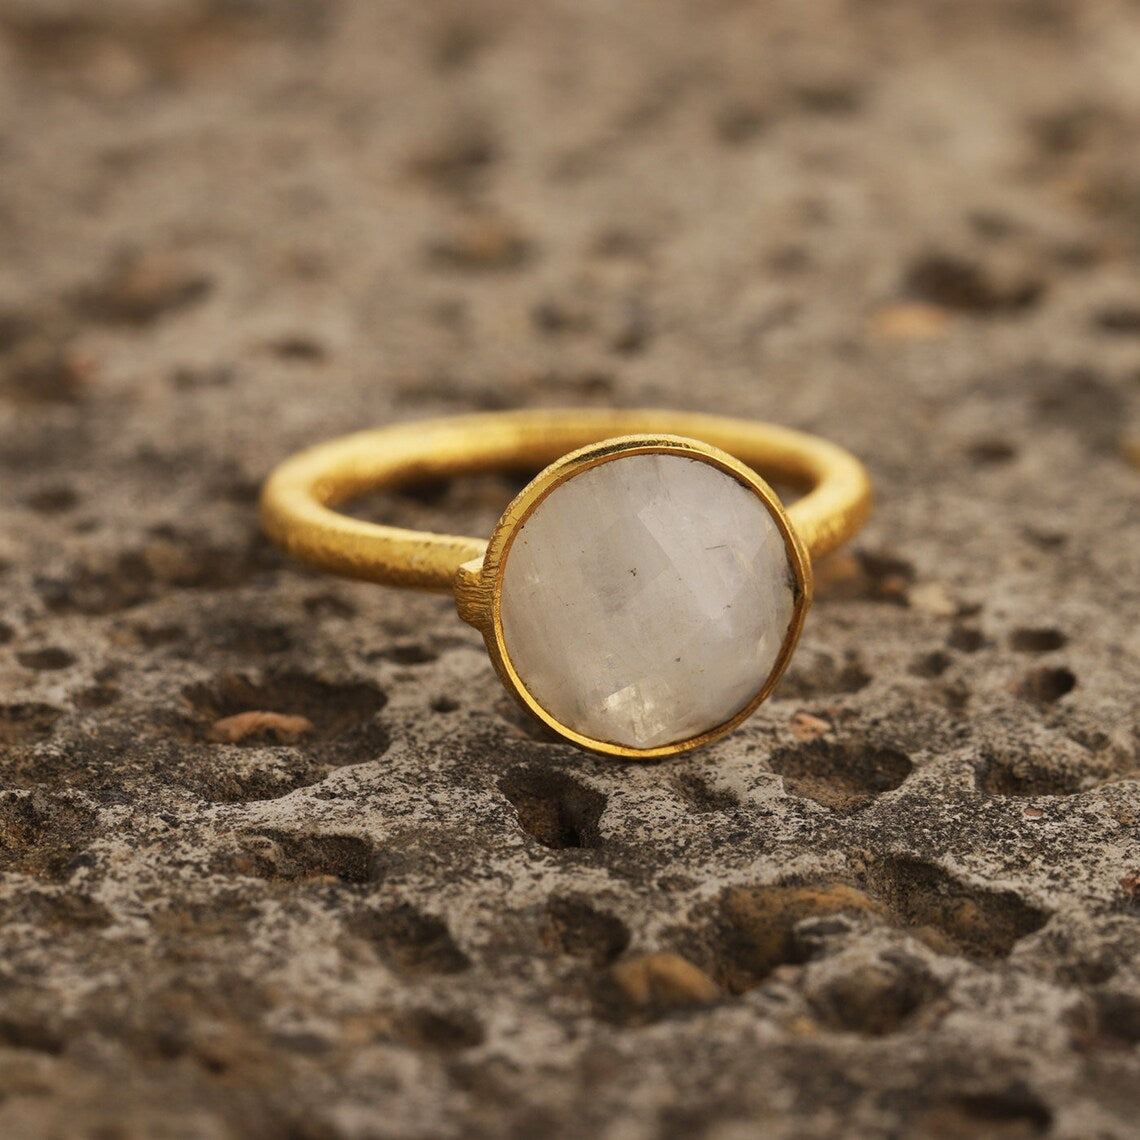 Rainbow Moonstone Gold Ring, 925 Sterling Silver Moonstone Ring, June Birthstone Ring, Round Moonstone Gold Ring, Gift For Her, Boho Ring